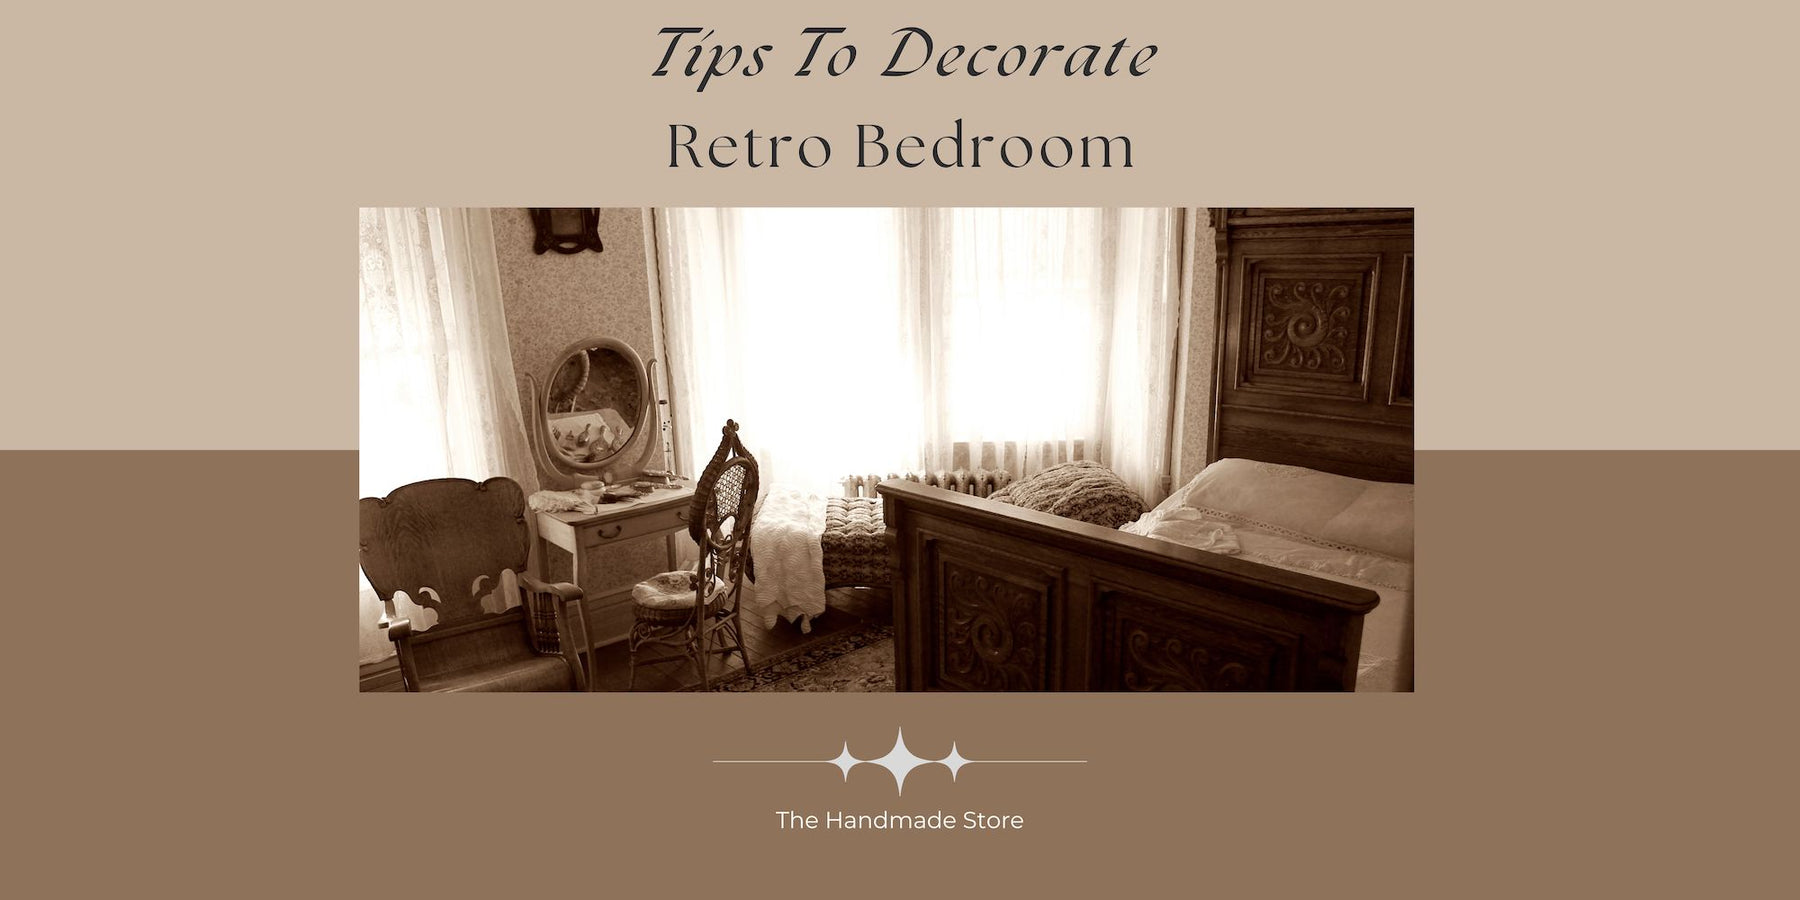 7 Tips To Decorate A Retro Bedroom - The Handmade Store